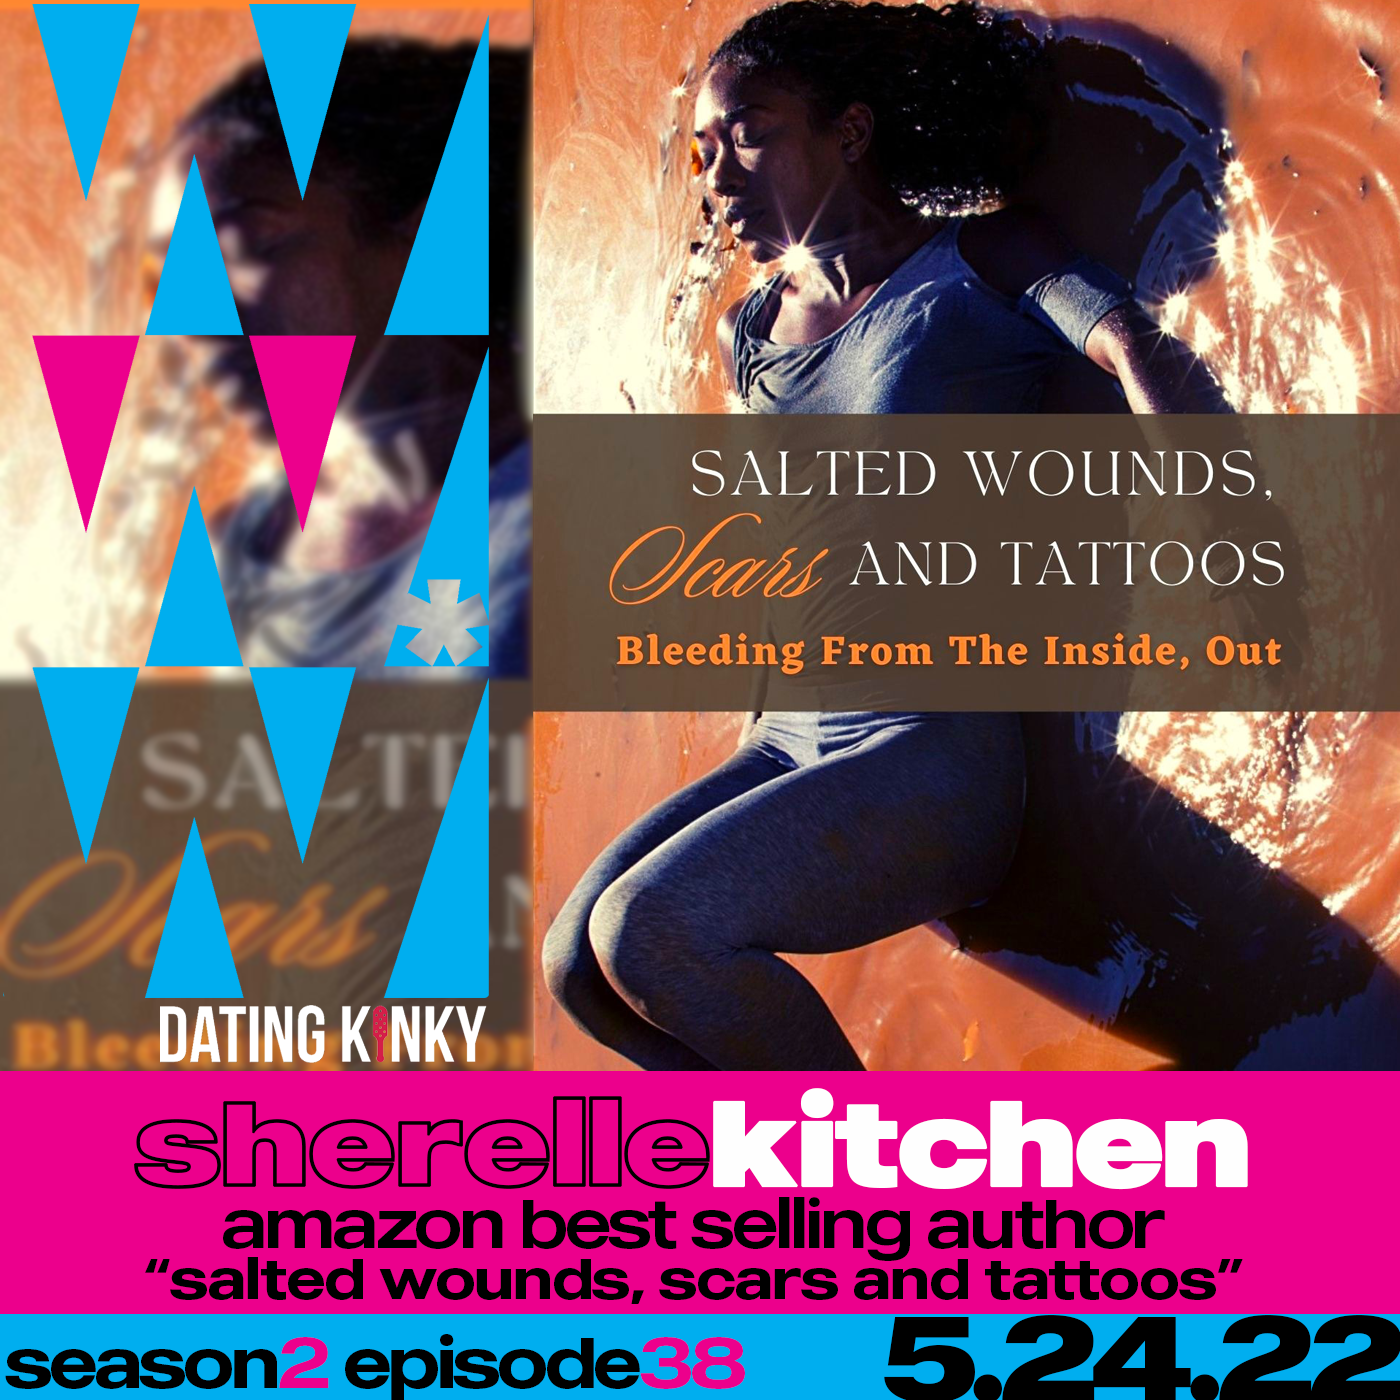 Sherelle Kitchen - “Salted Wounds, Scars and Tattoos: Bleeding from the Inside Out”